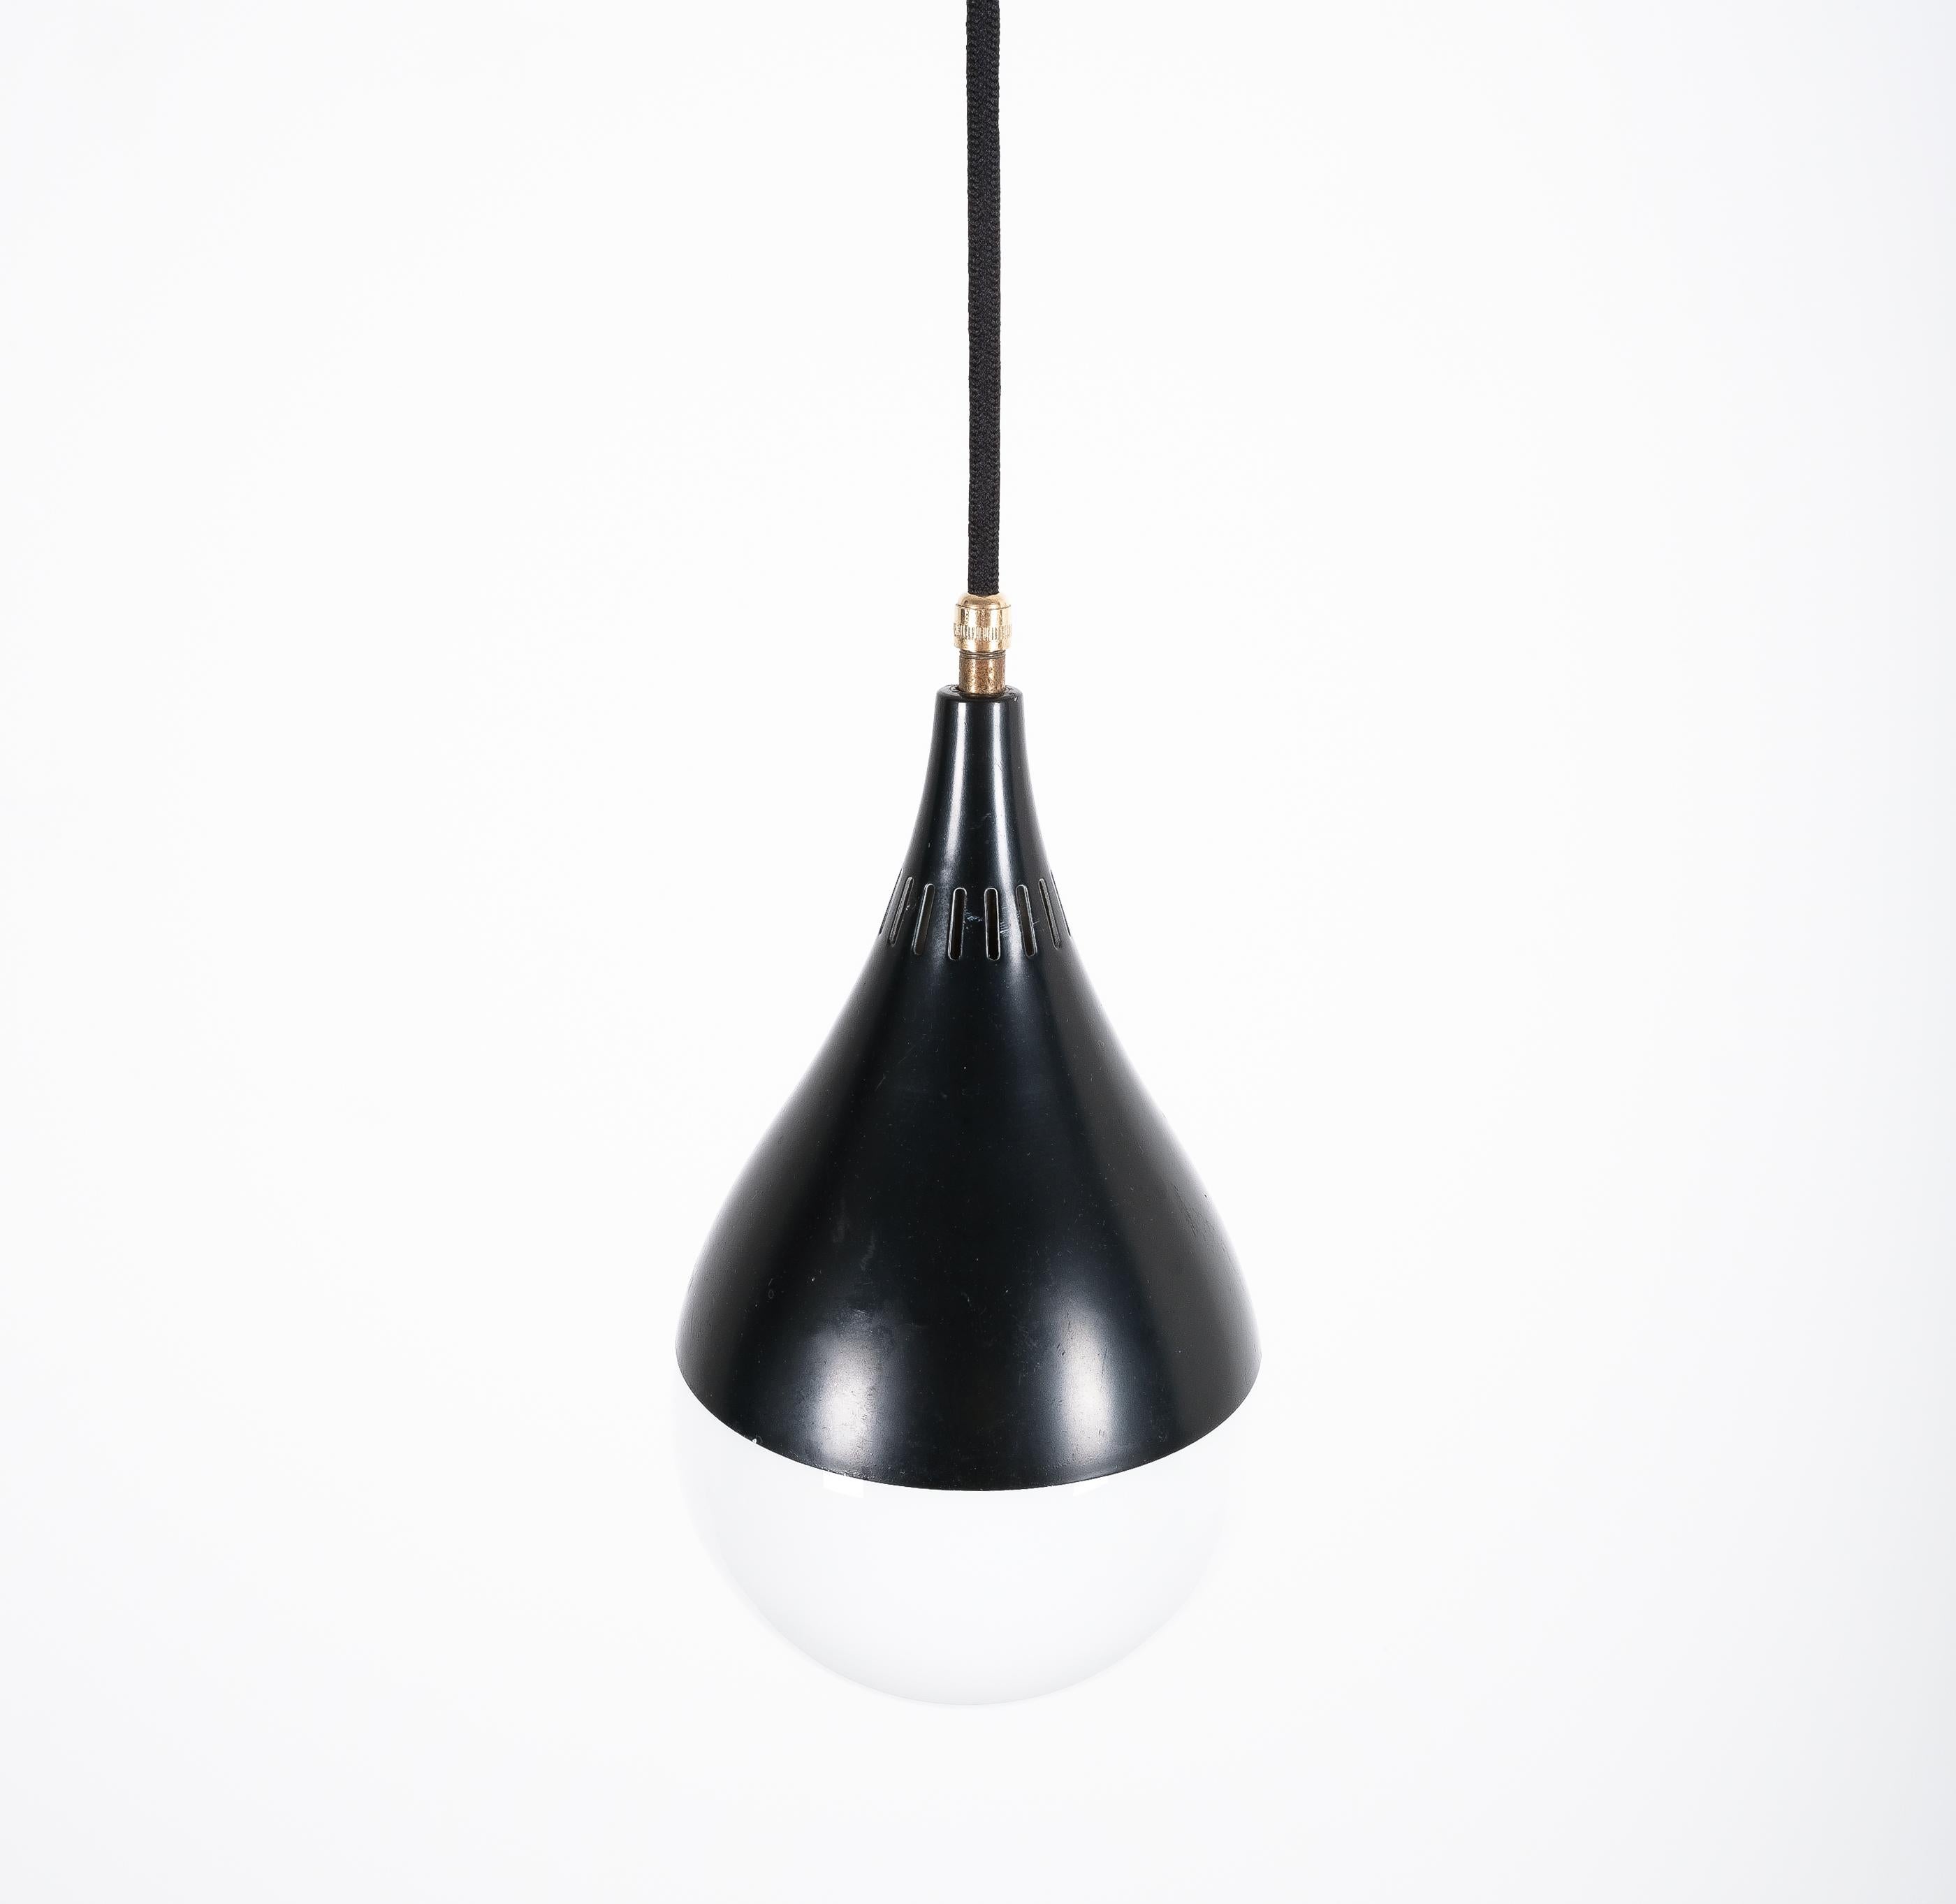 Stilnovo Black Ball Pendant Lamps '5' Opal Glass, circa 1950 In Good Condition For Sale In Vienna, AT